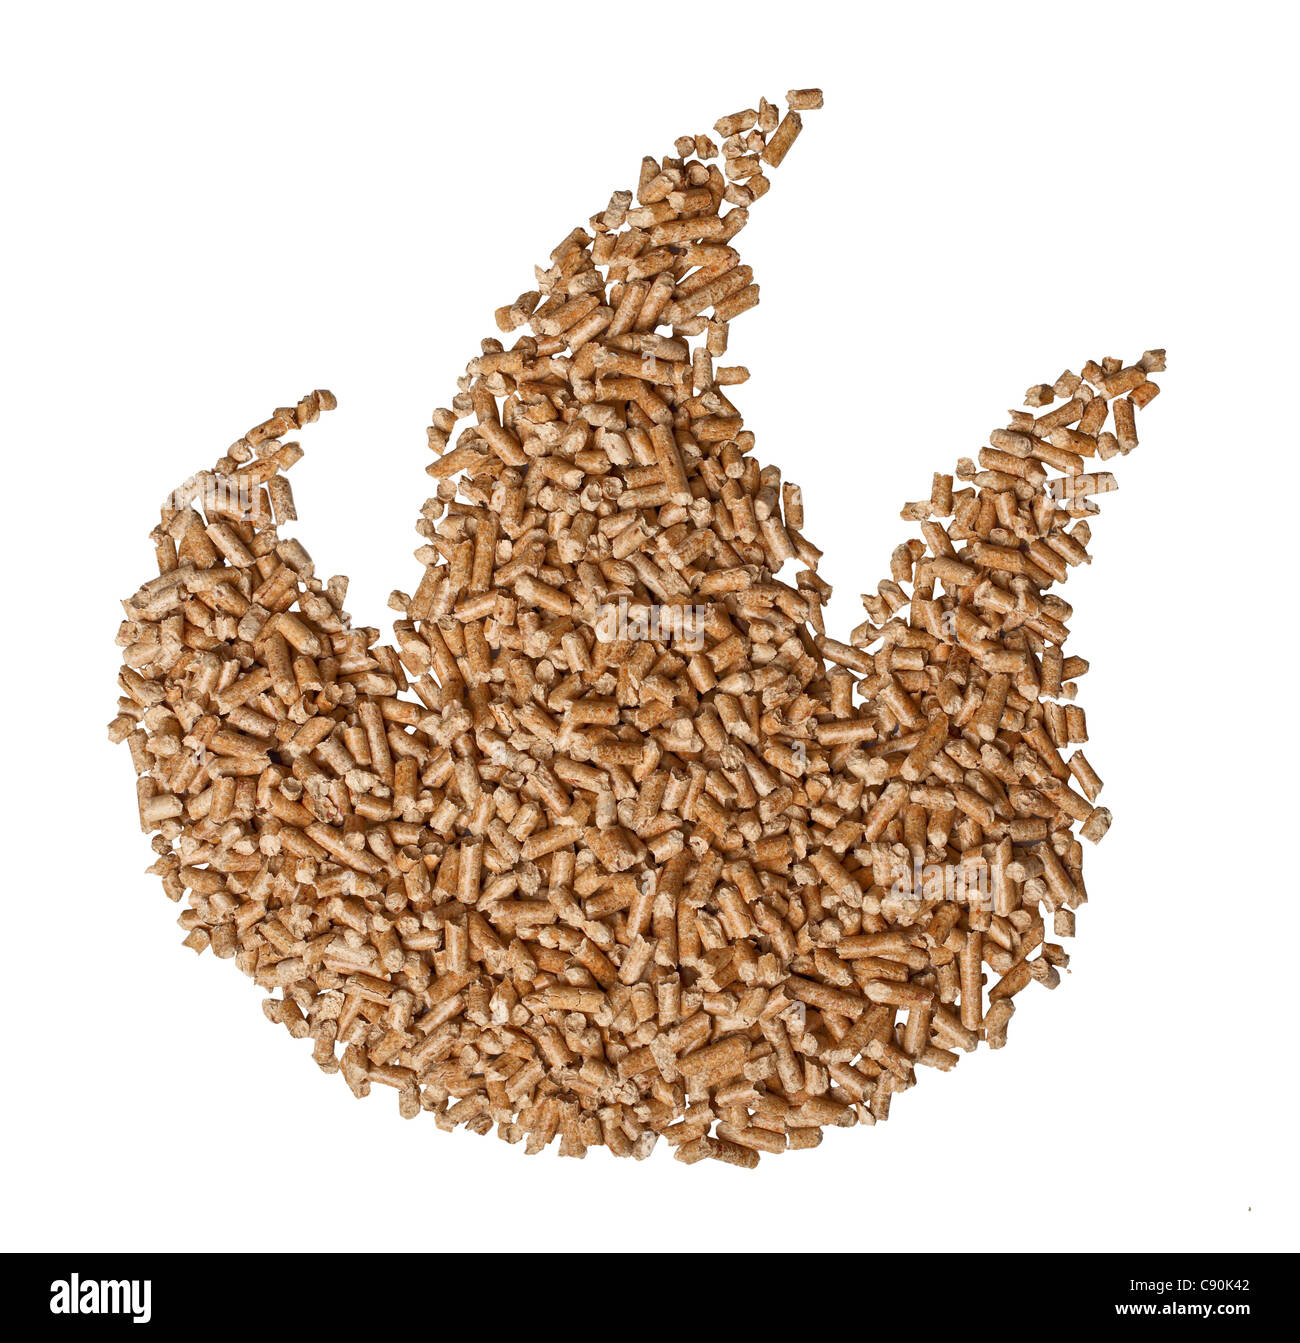 wood pellet flame on white background Stock Photo